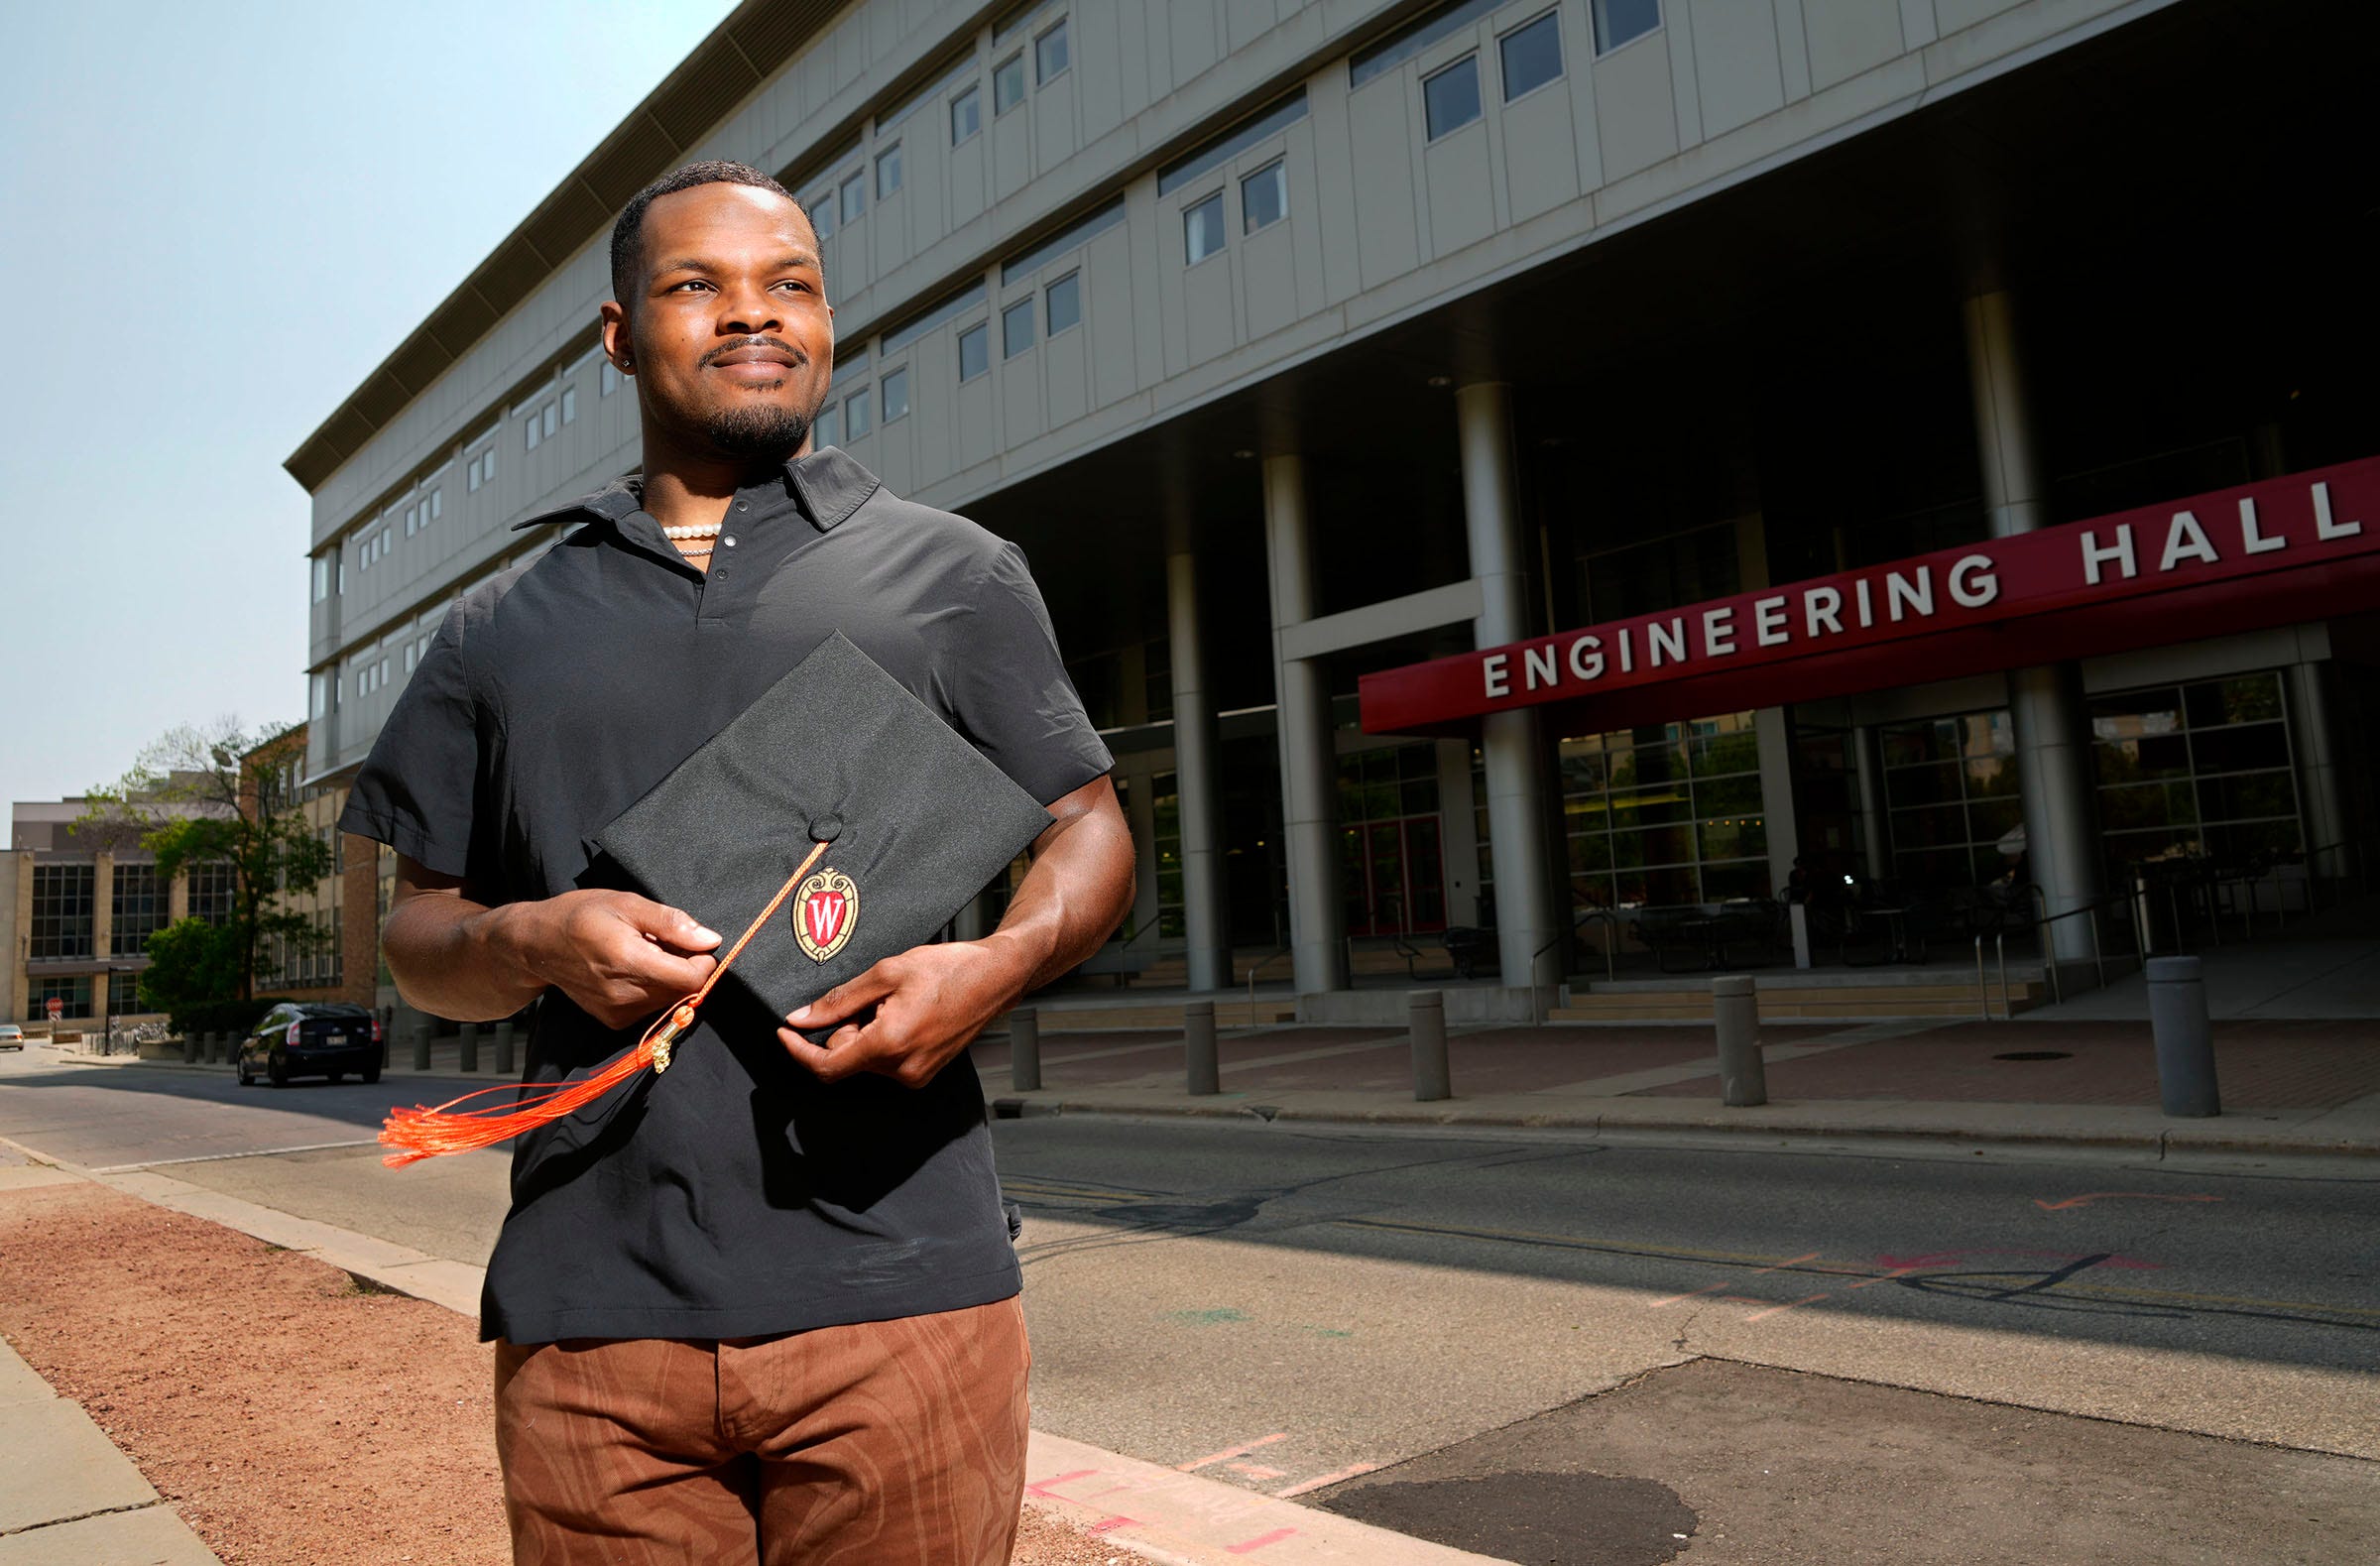 Isaac Wells-Cage says he fought isolation and imposter syndrome in college after a difficult childhood, but he earned his engineering degree this spring.